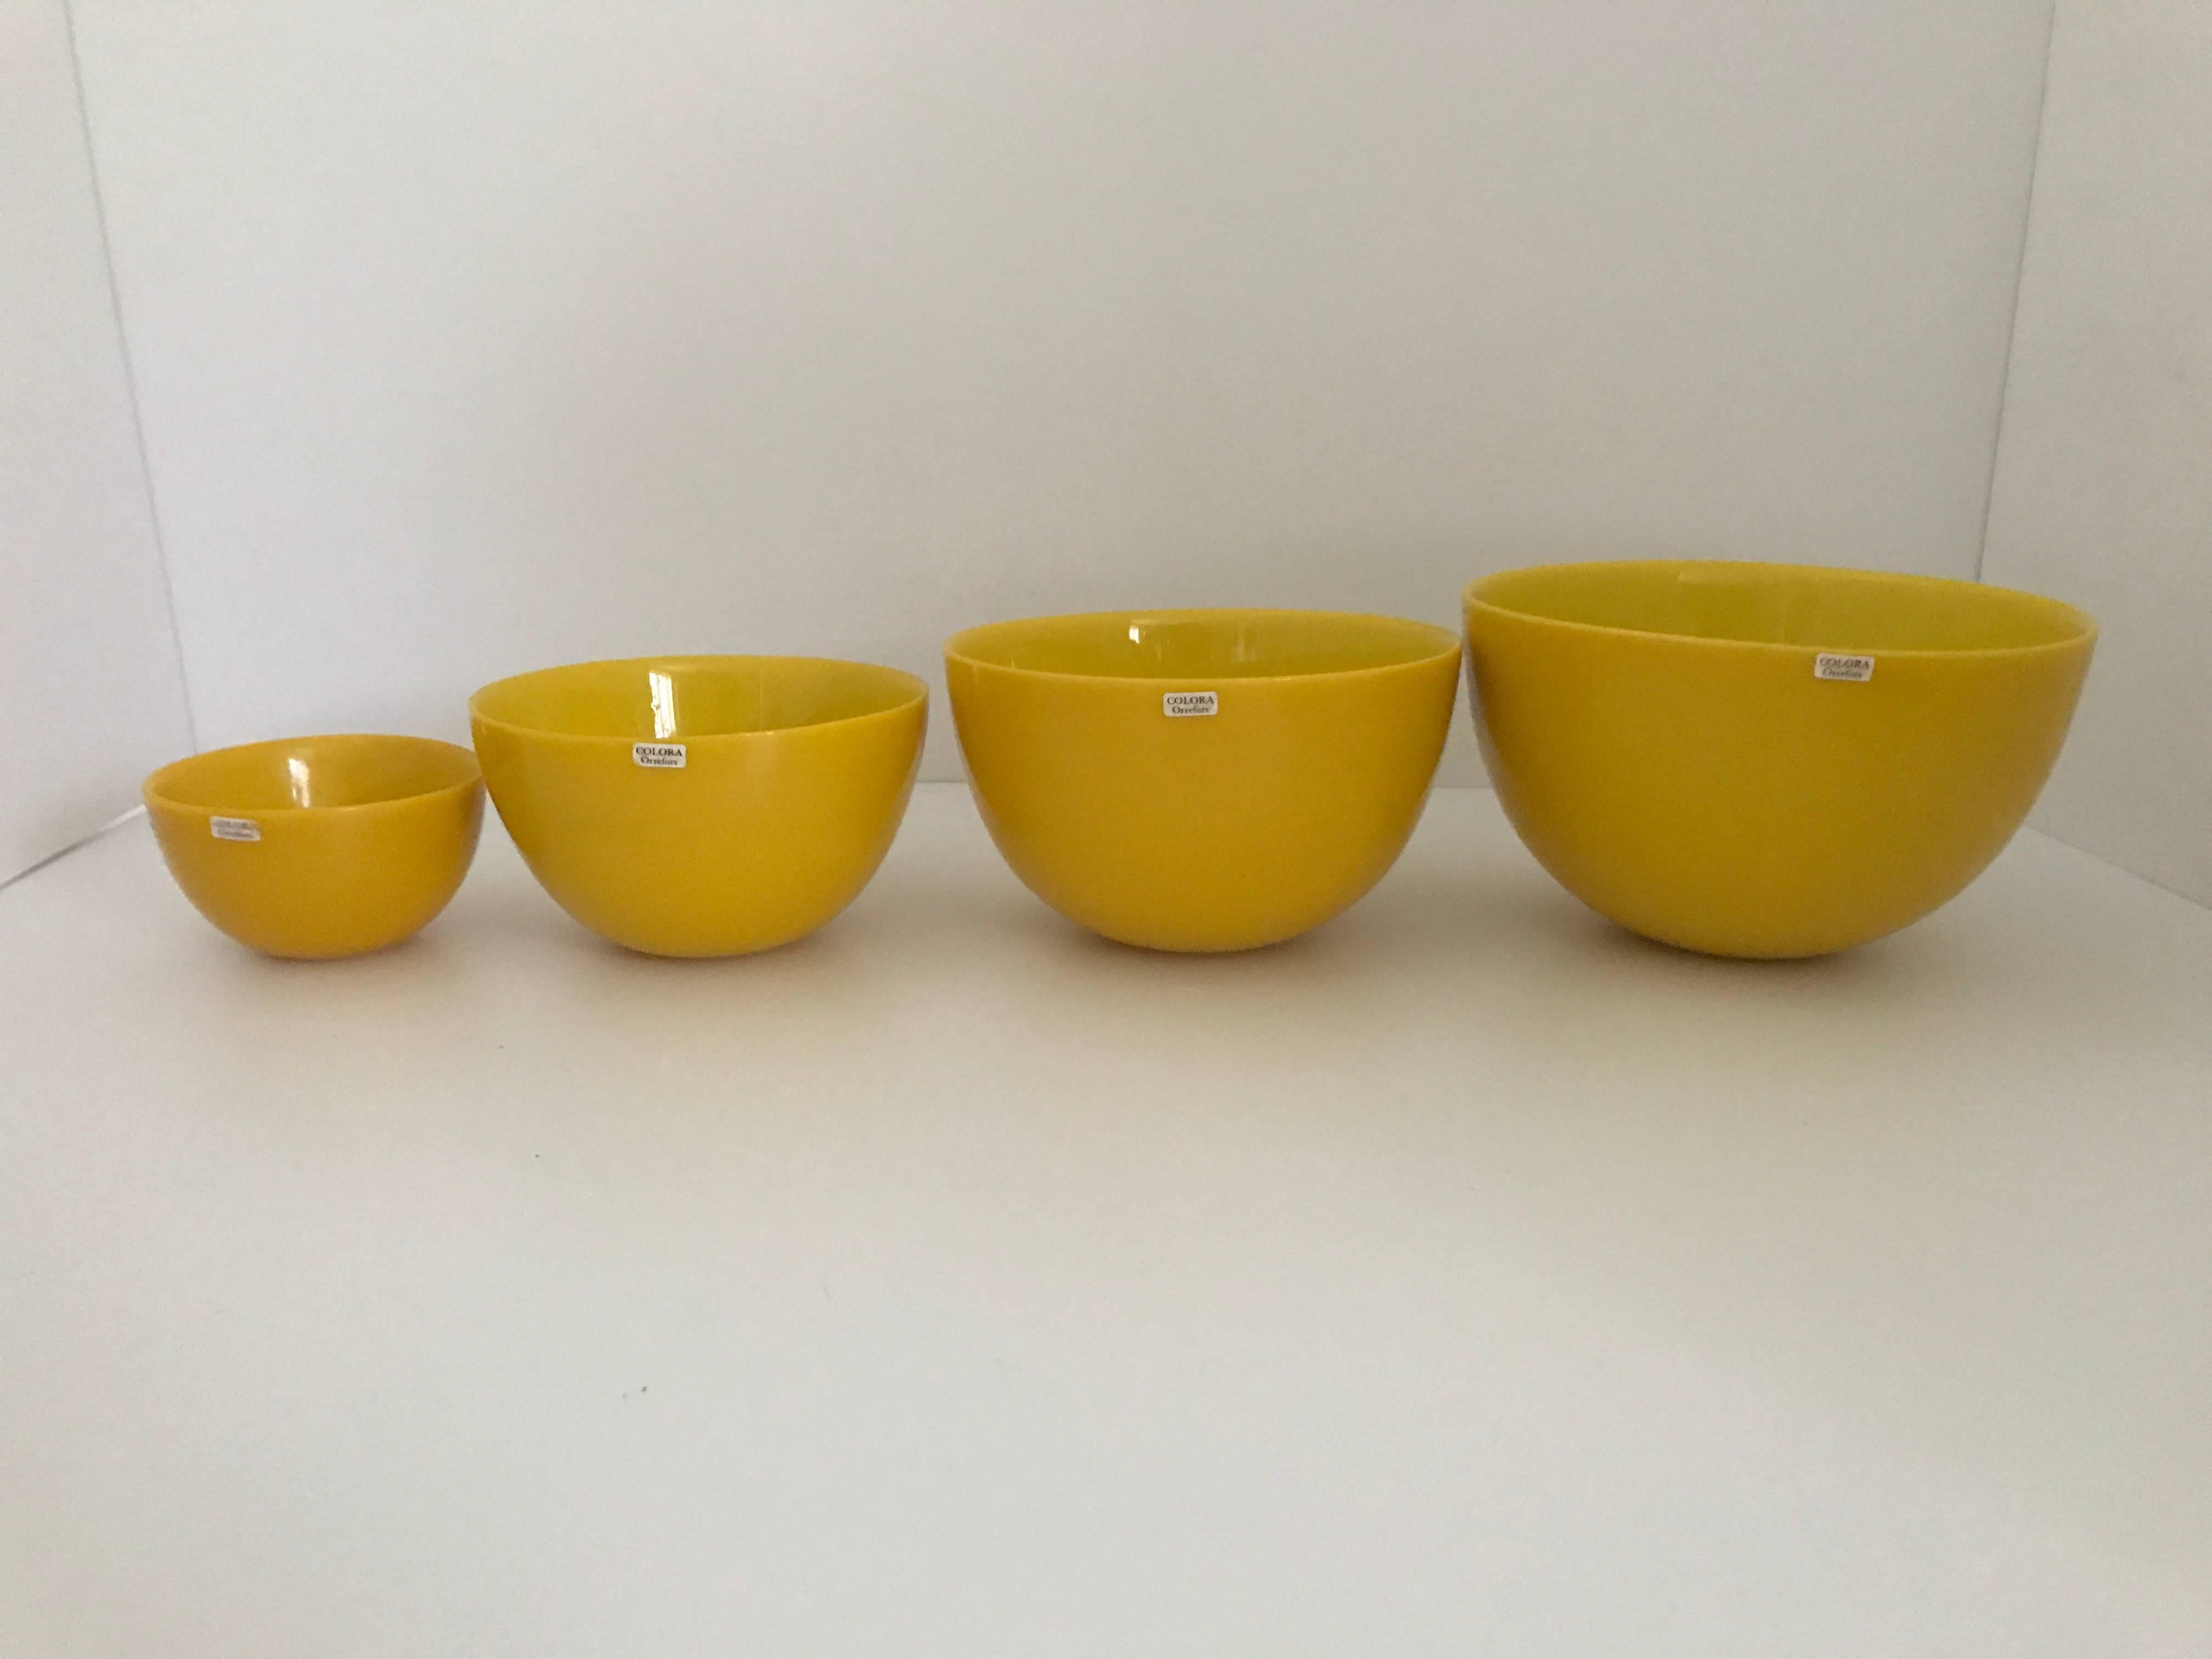 Mid-20th century Swedish Orrefors colora bowls four pieces set Sven Palmqvist.
This four piece set of serving bowls is in its original box and the bowls are in fantastic original condition. They are most likely made somewhere around 1960 in